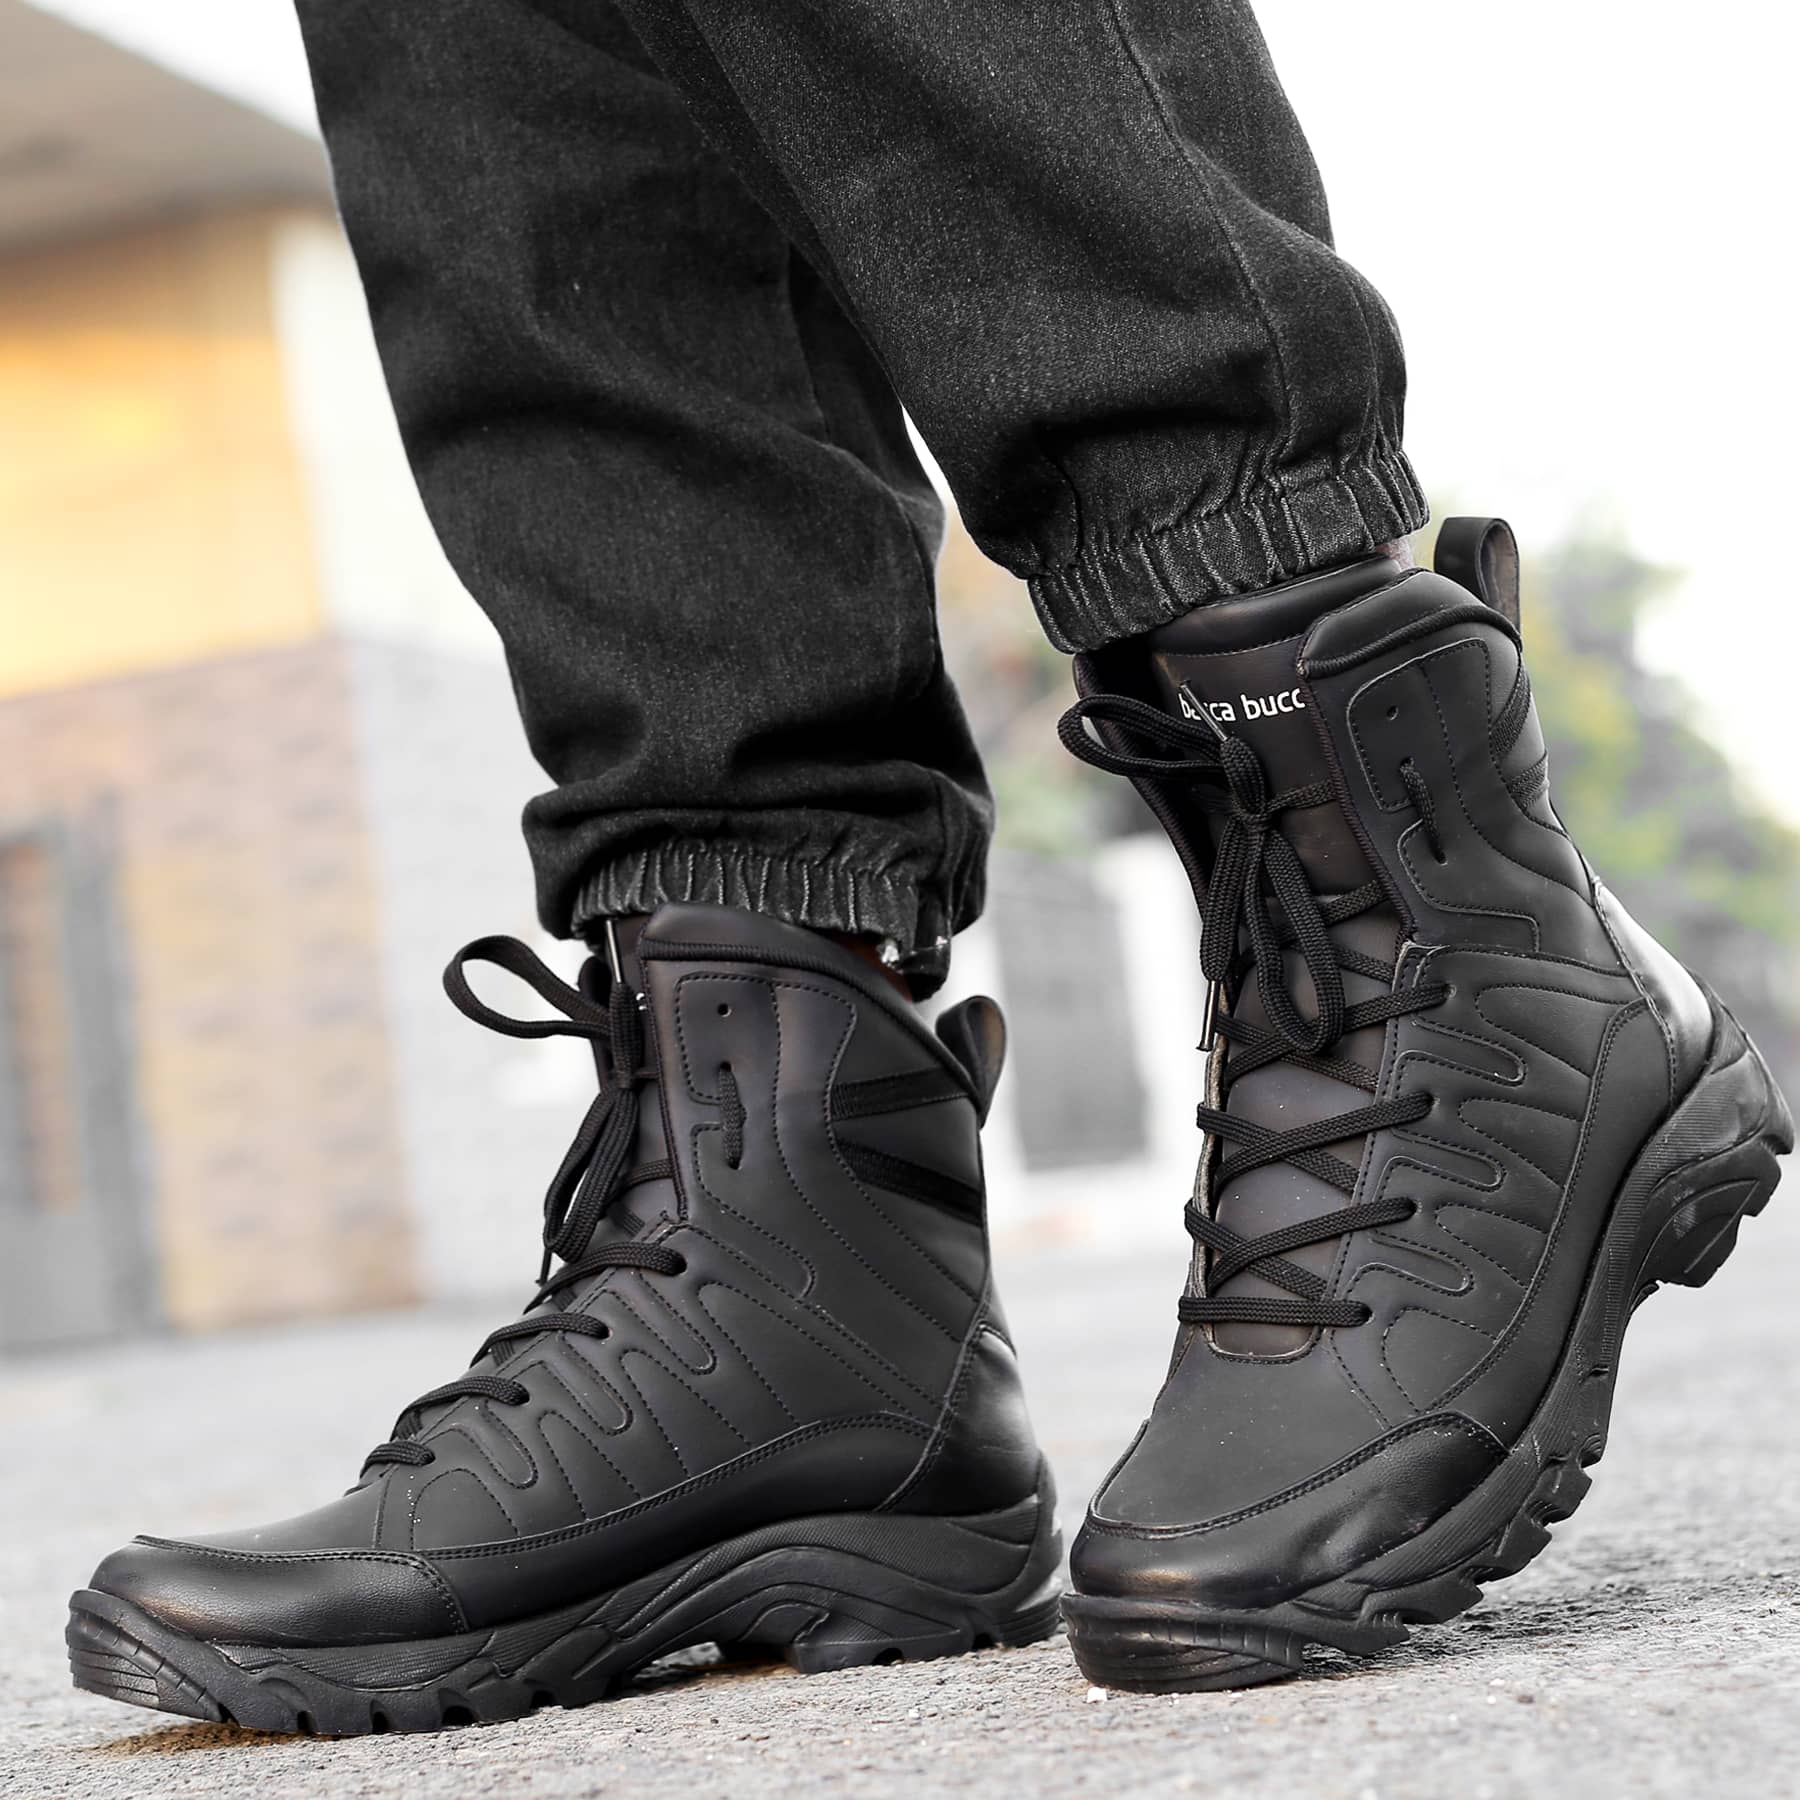 Mild Water Proof Snow Boots  FLAME 7-Eye Moto Inspired Boots